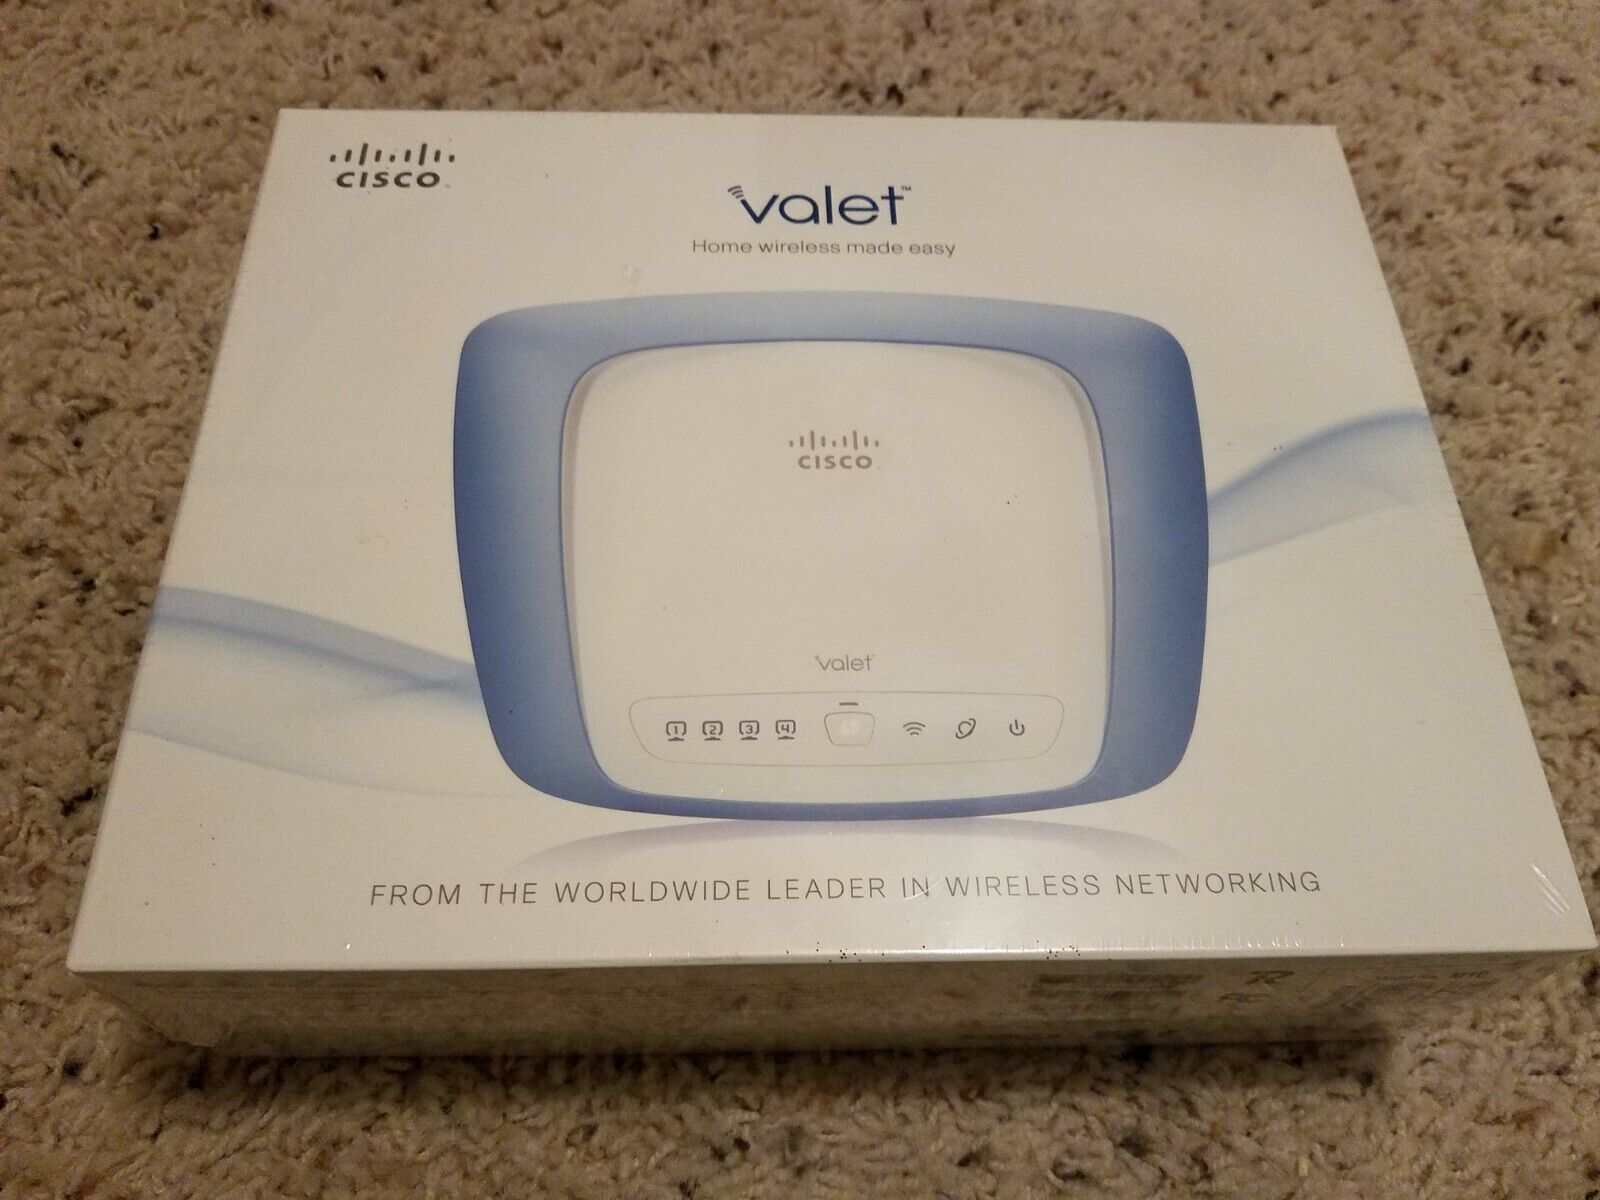 Brand New Linksys Valet M10 300 Mbps 4-Port 10/100 Wireless N Router by Cisco